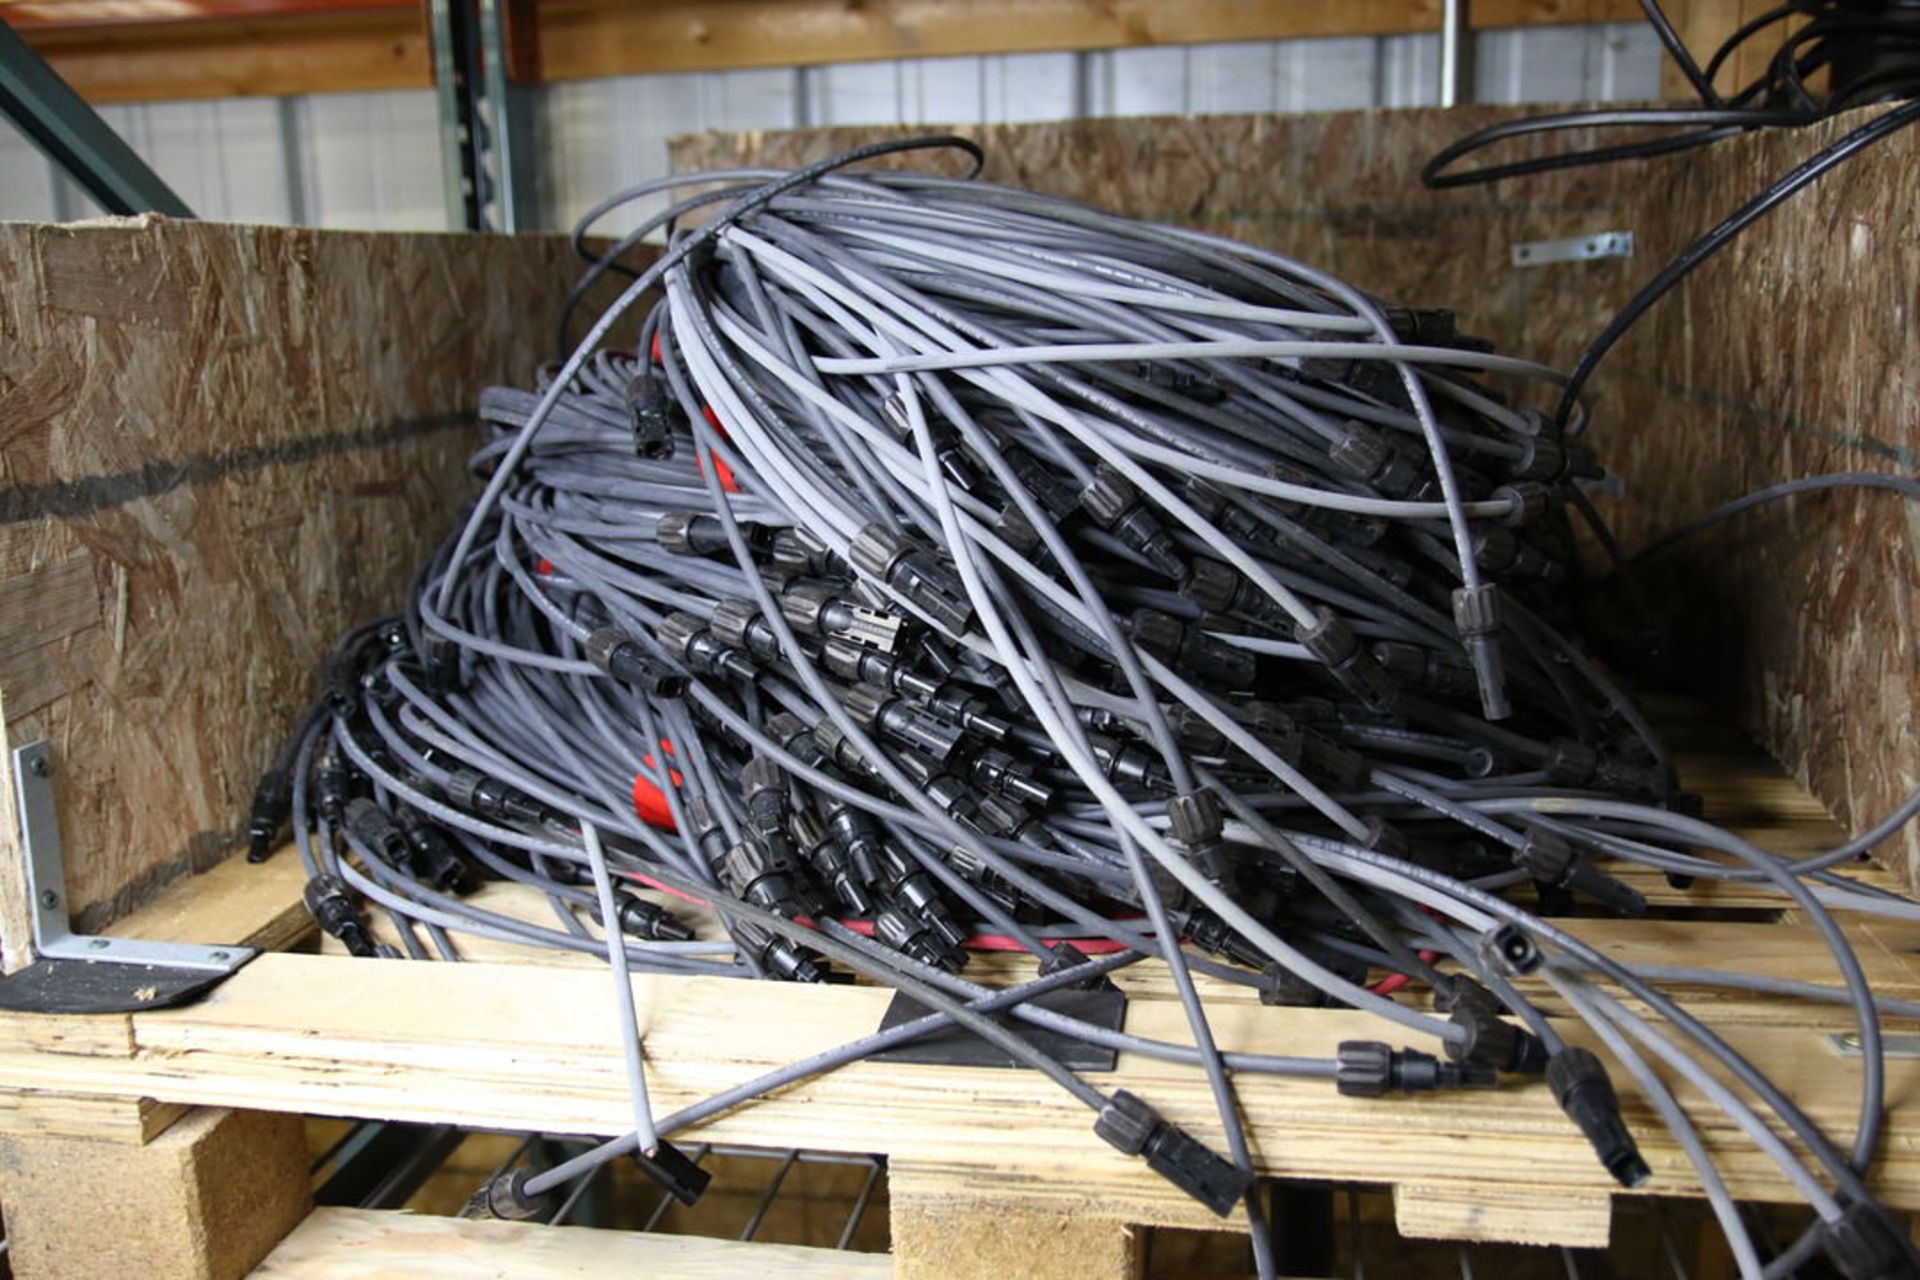 Pallet of IQ Cables and Advanced Digital Cables - Image 2 of 3